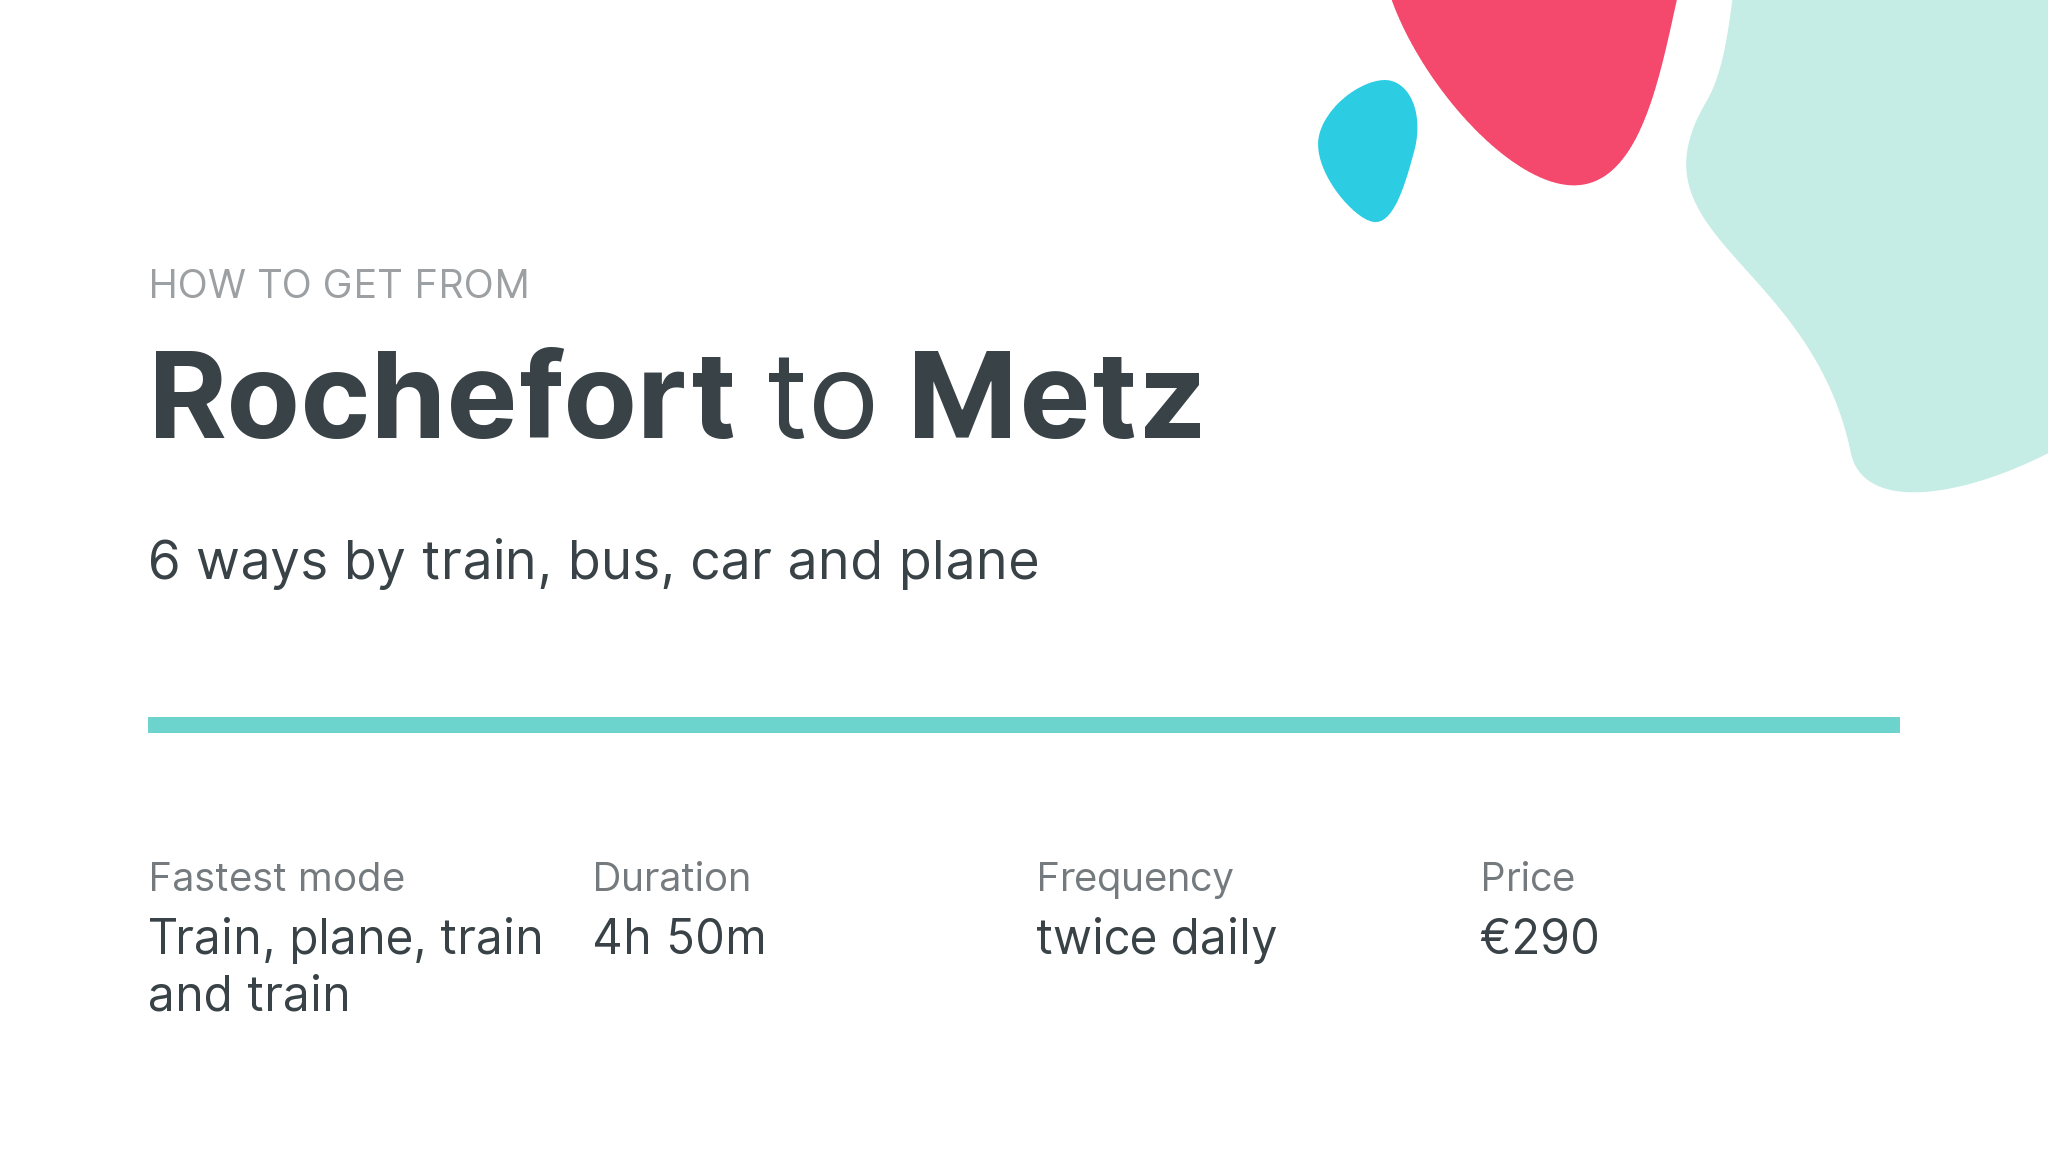 How do I get from Rochefort to Metz